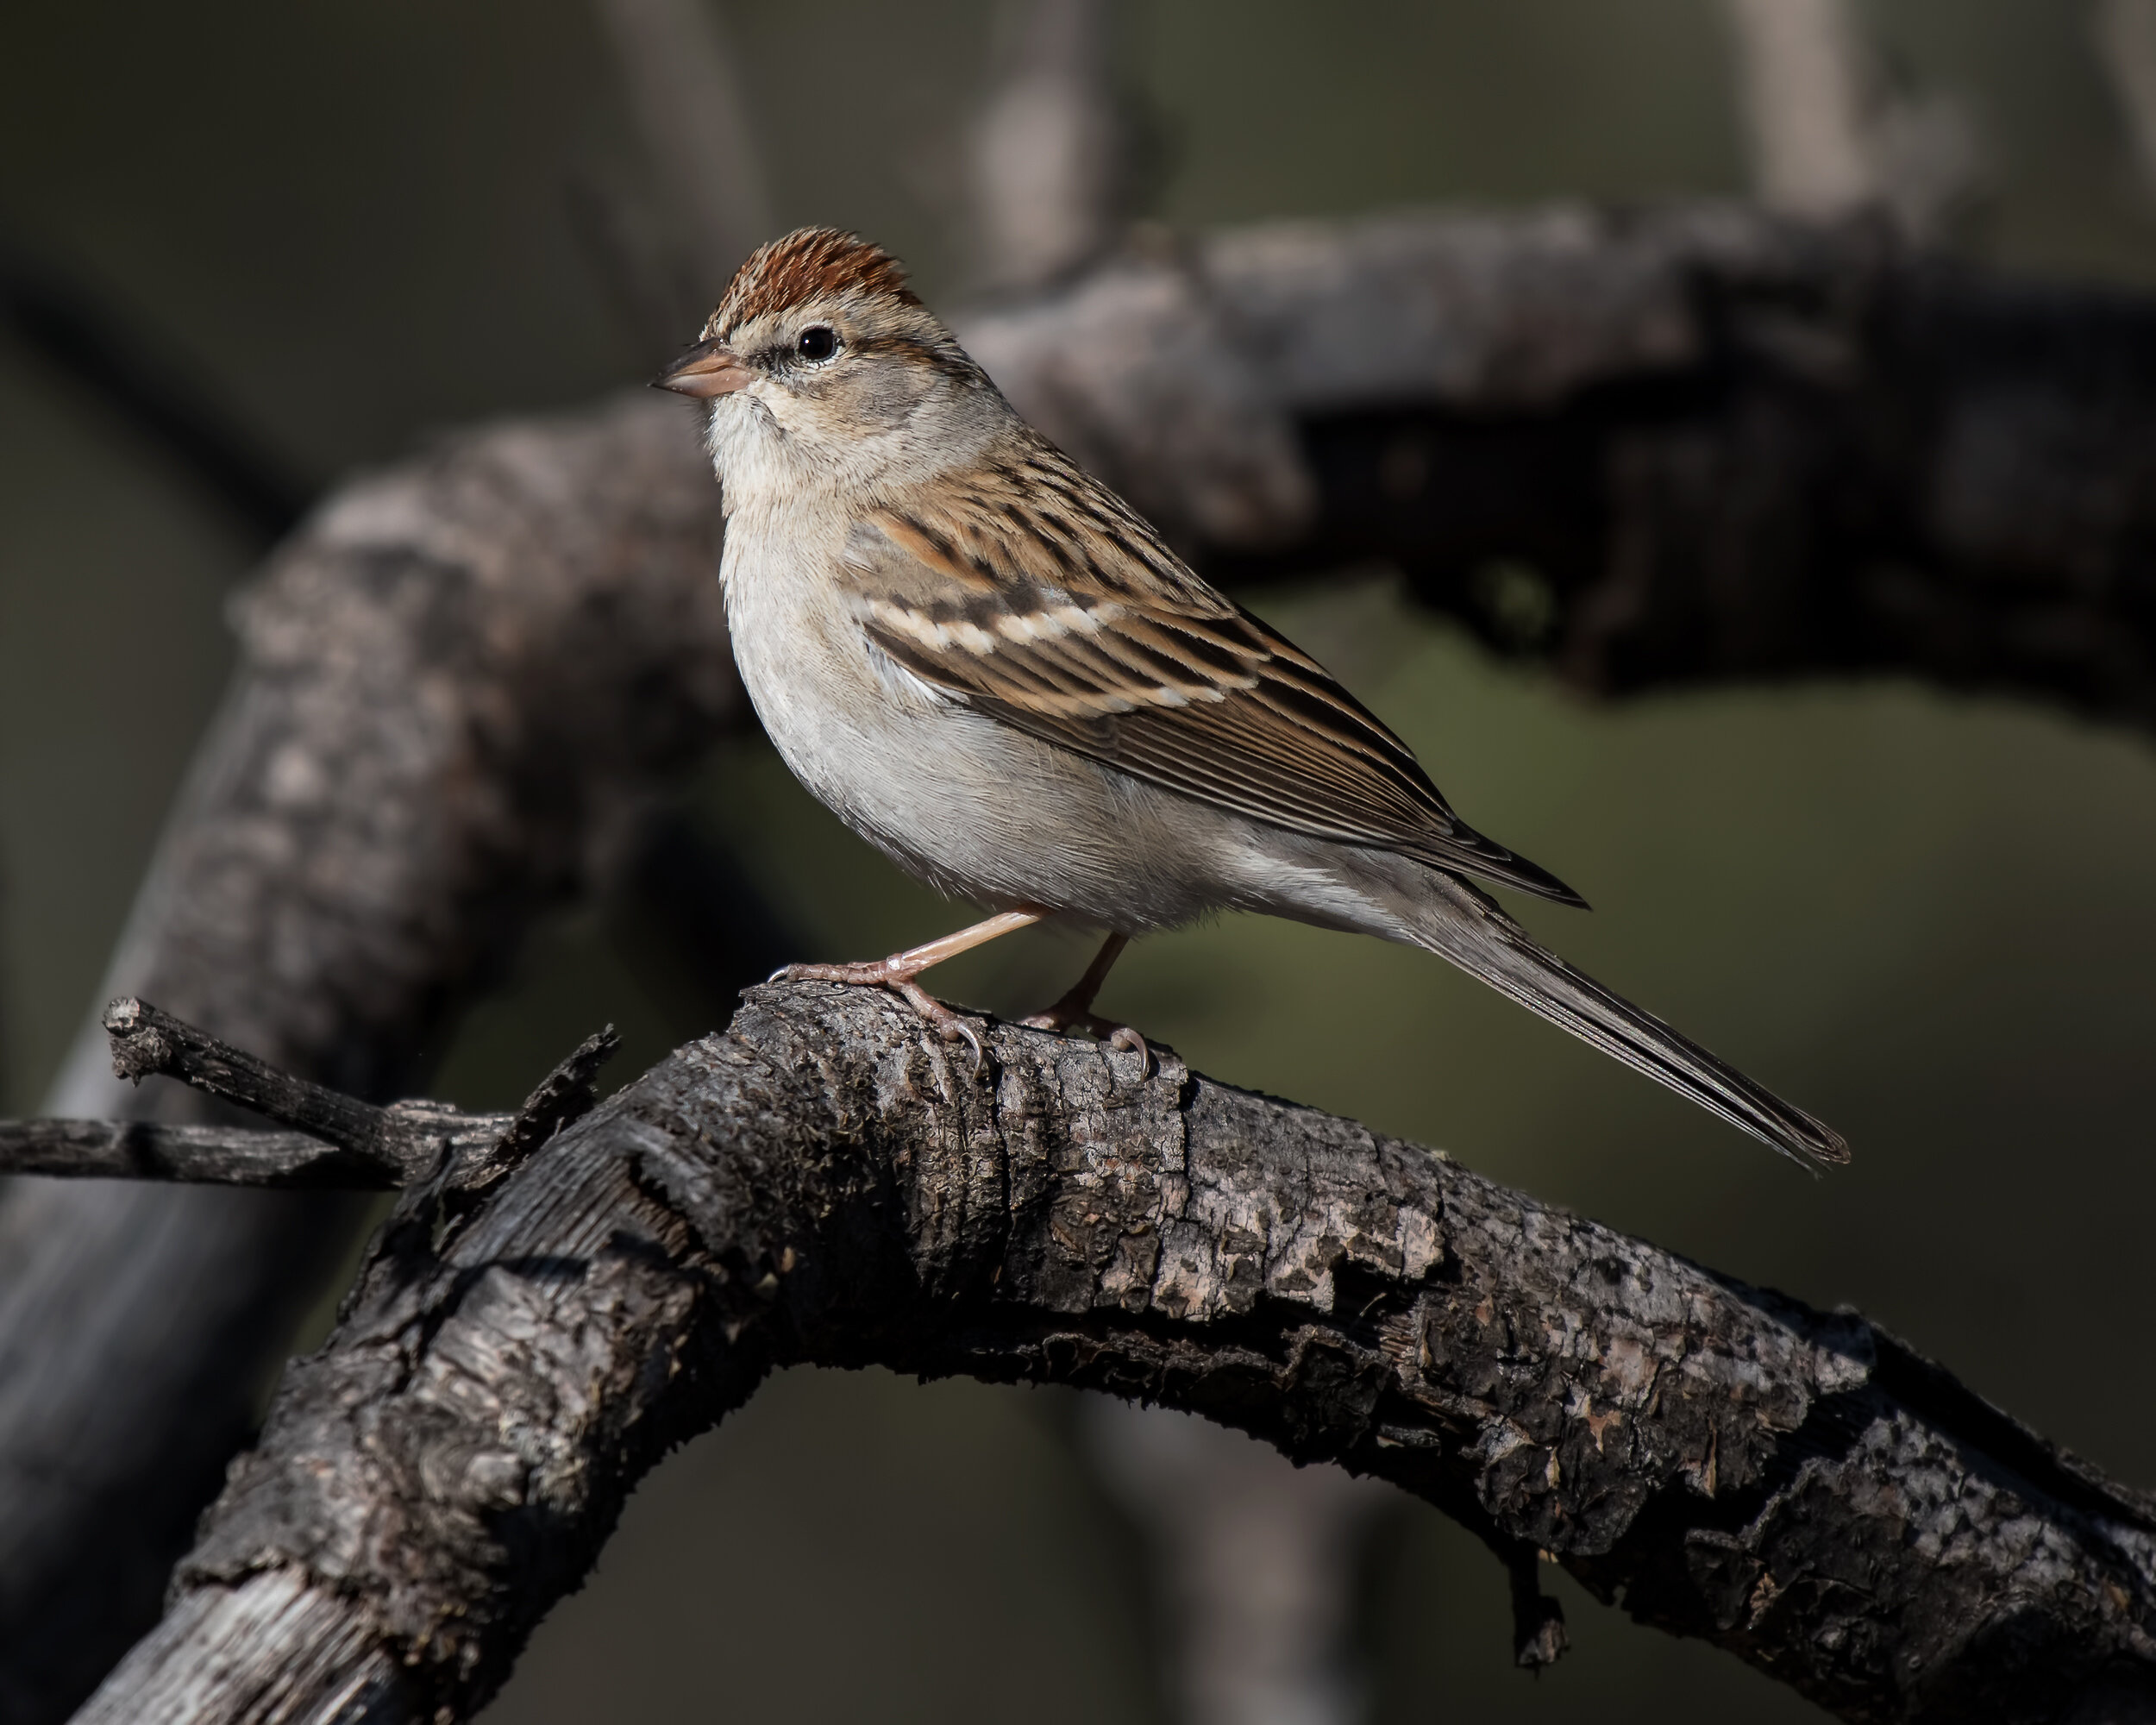 Chipping Sparrow, Nonbreeding adult / immature